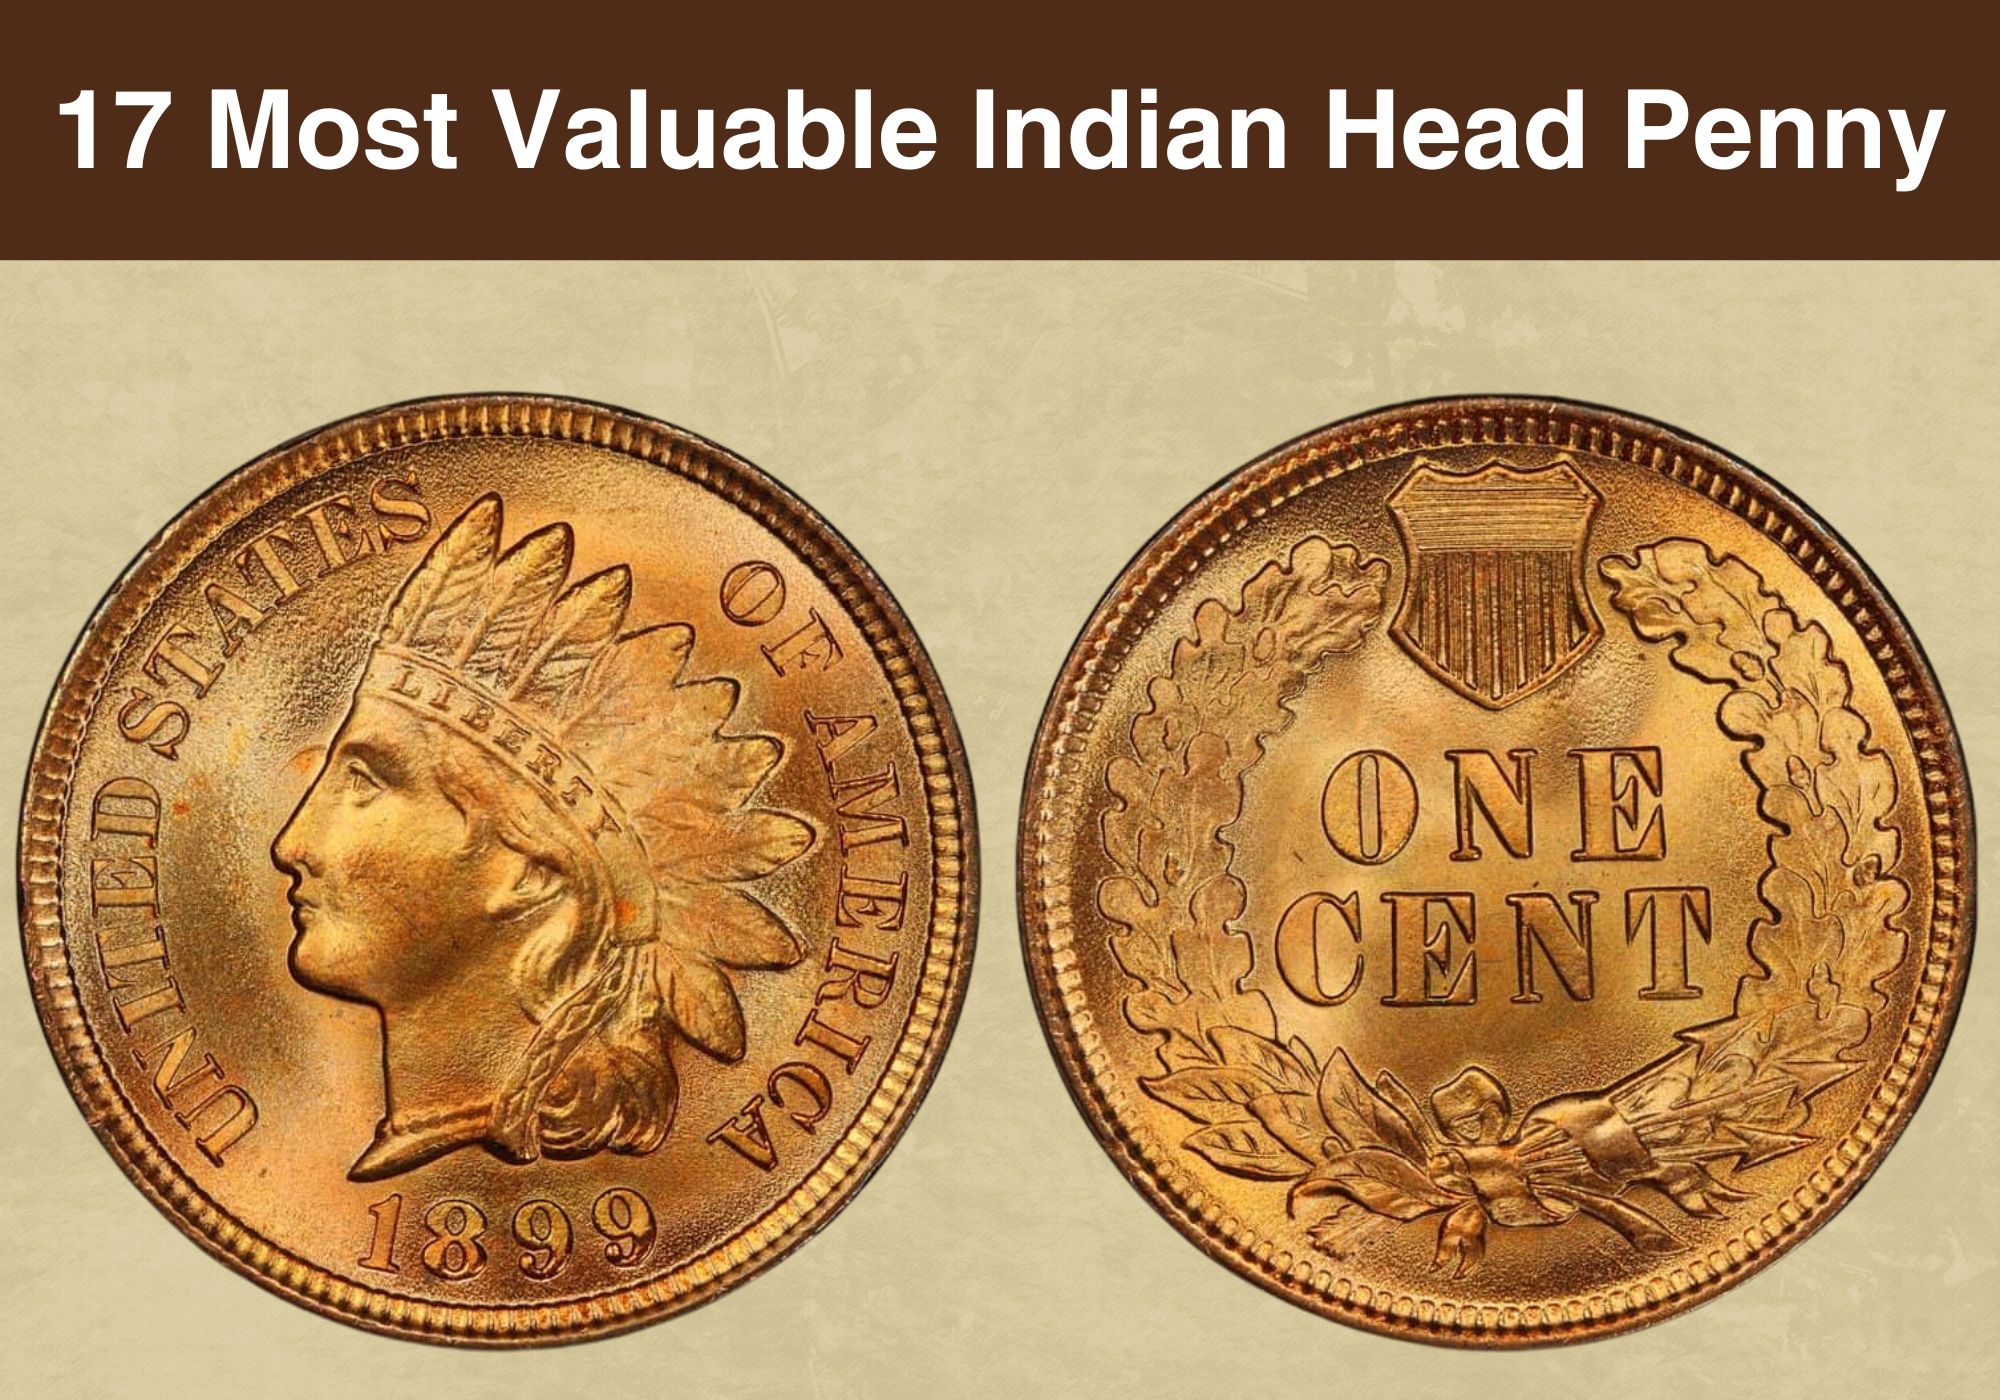 17 Most Valuable Indian Head Penny